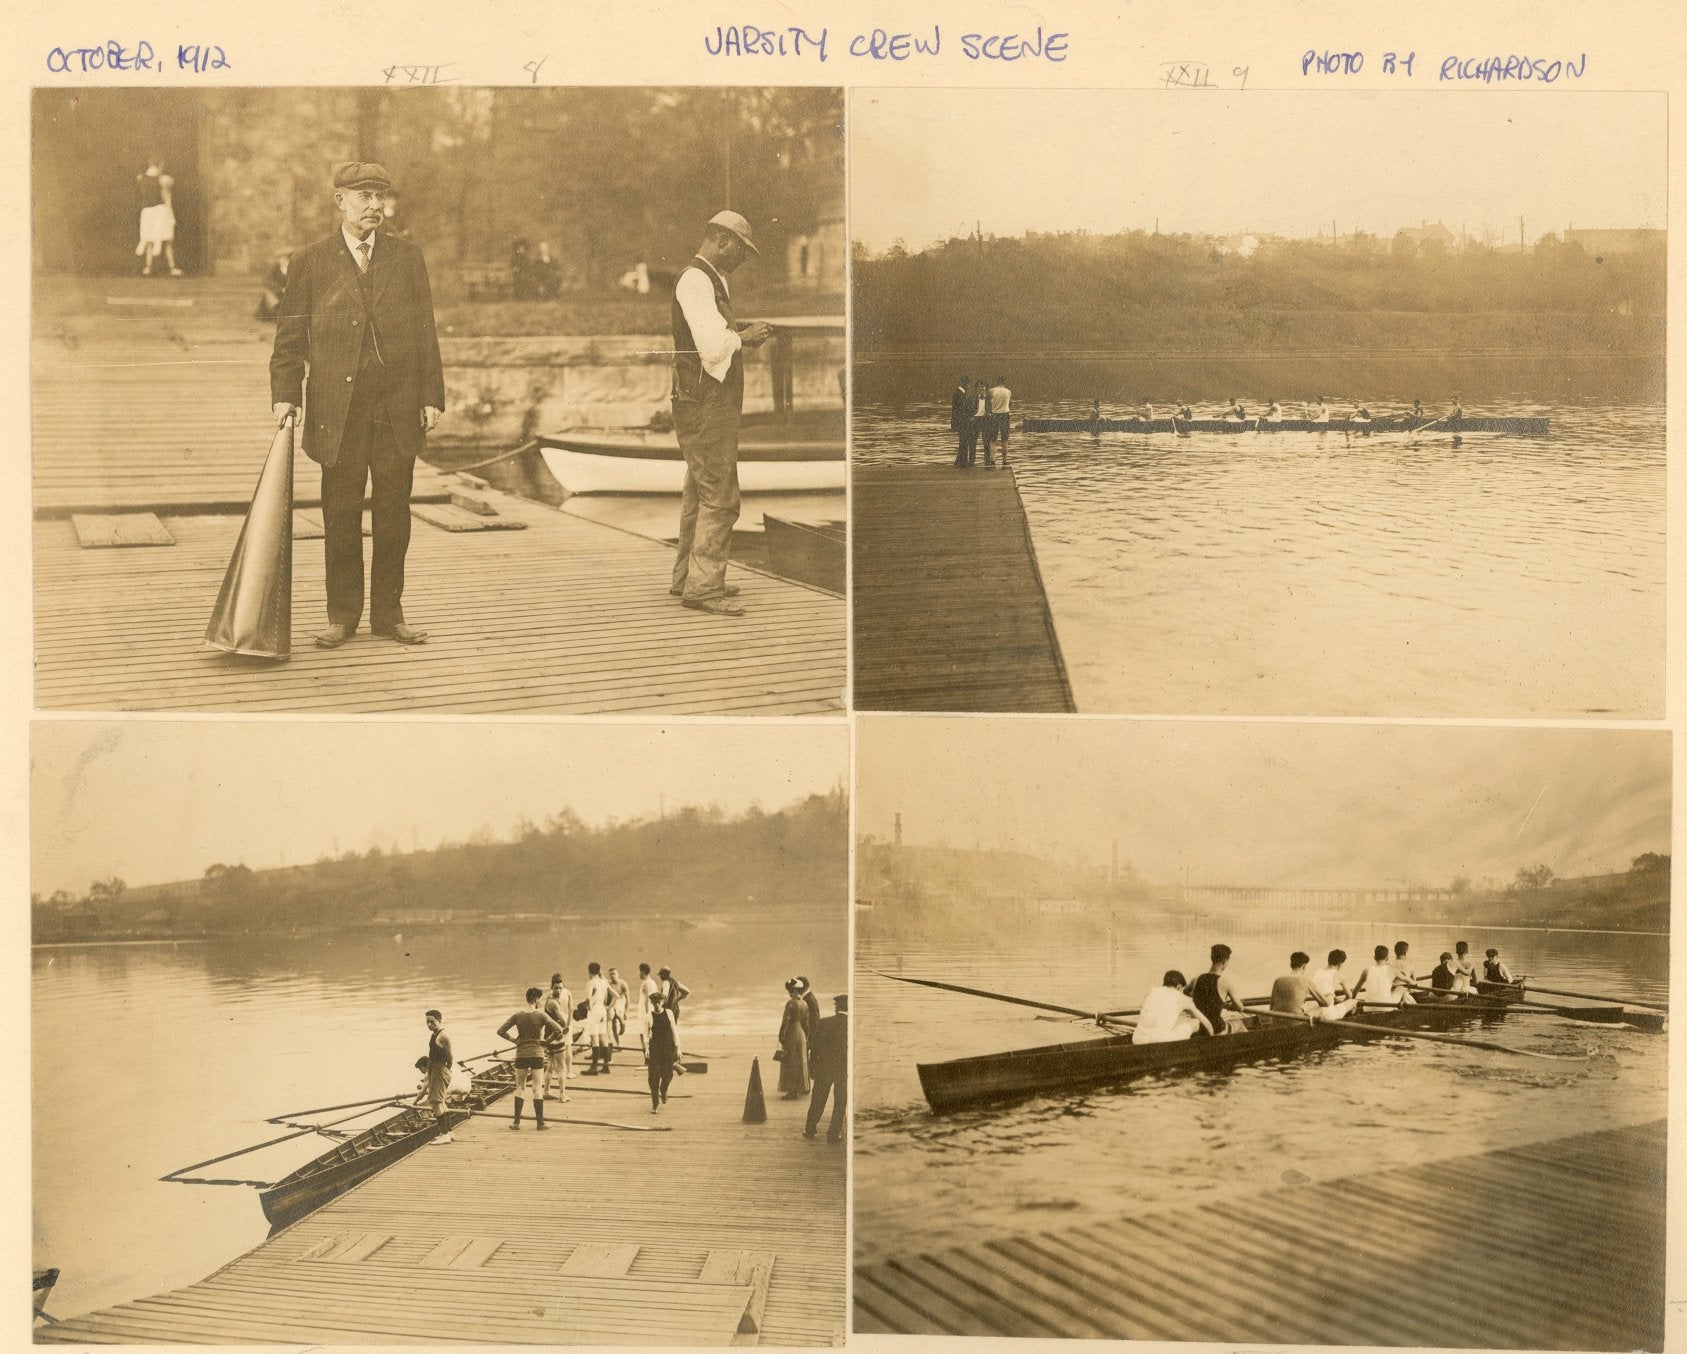 Crew team training at the Boat House, 1912